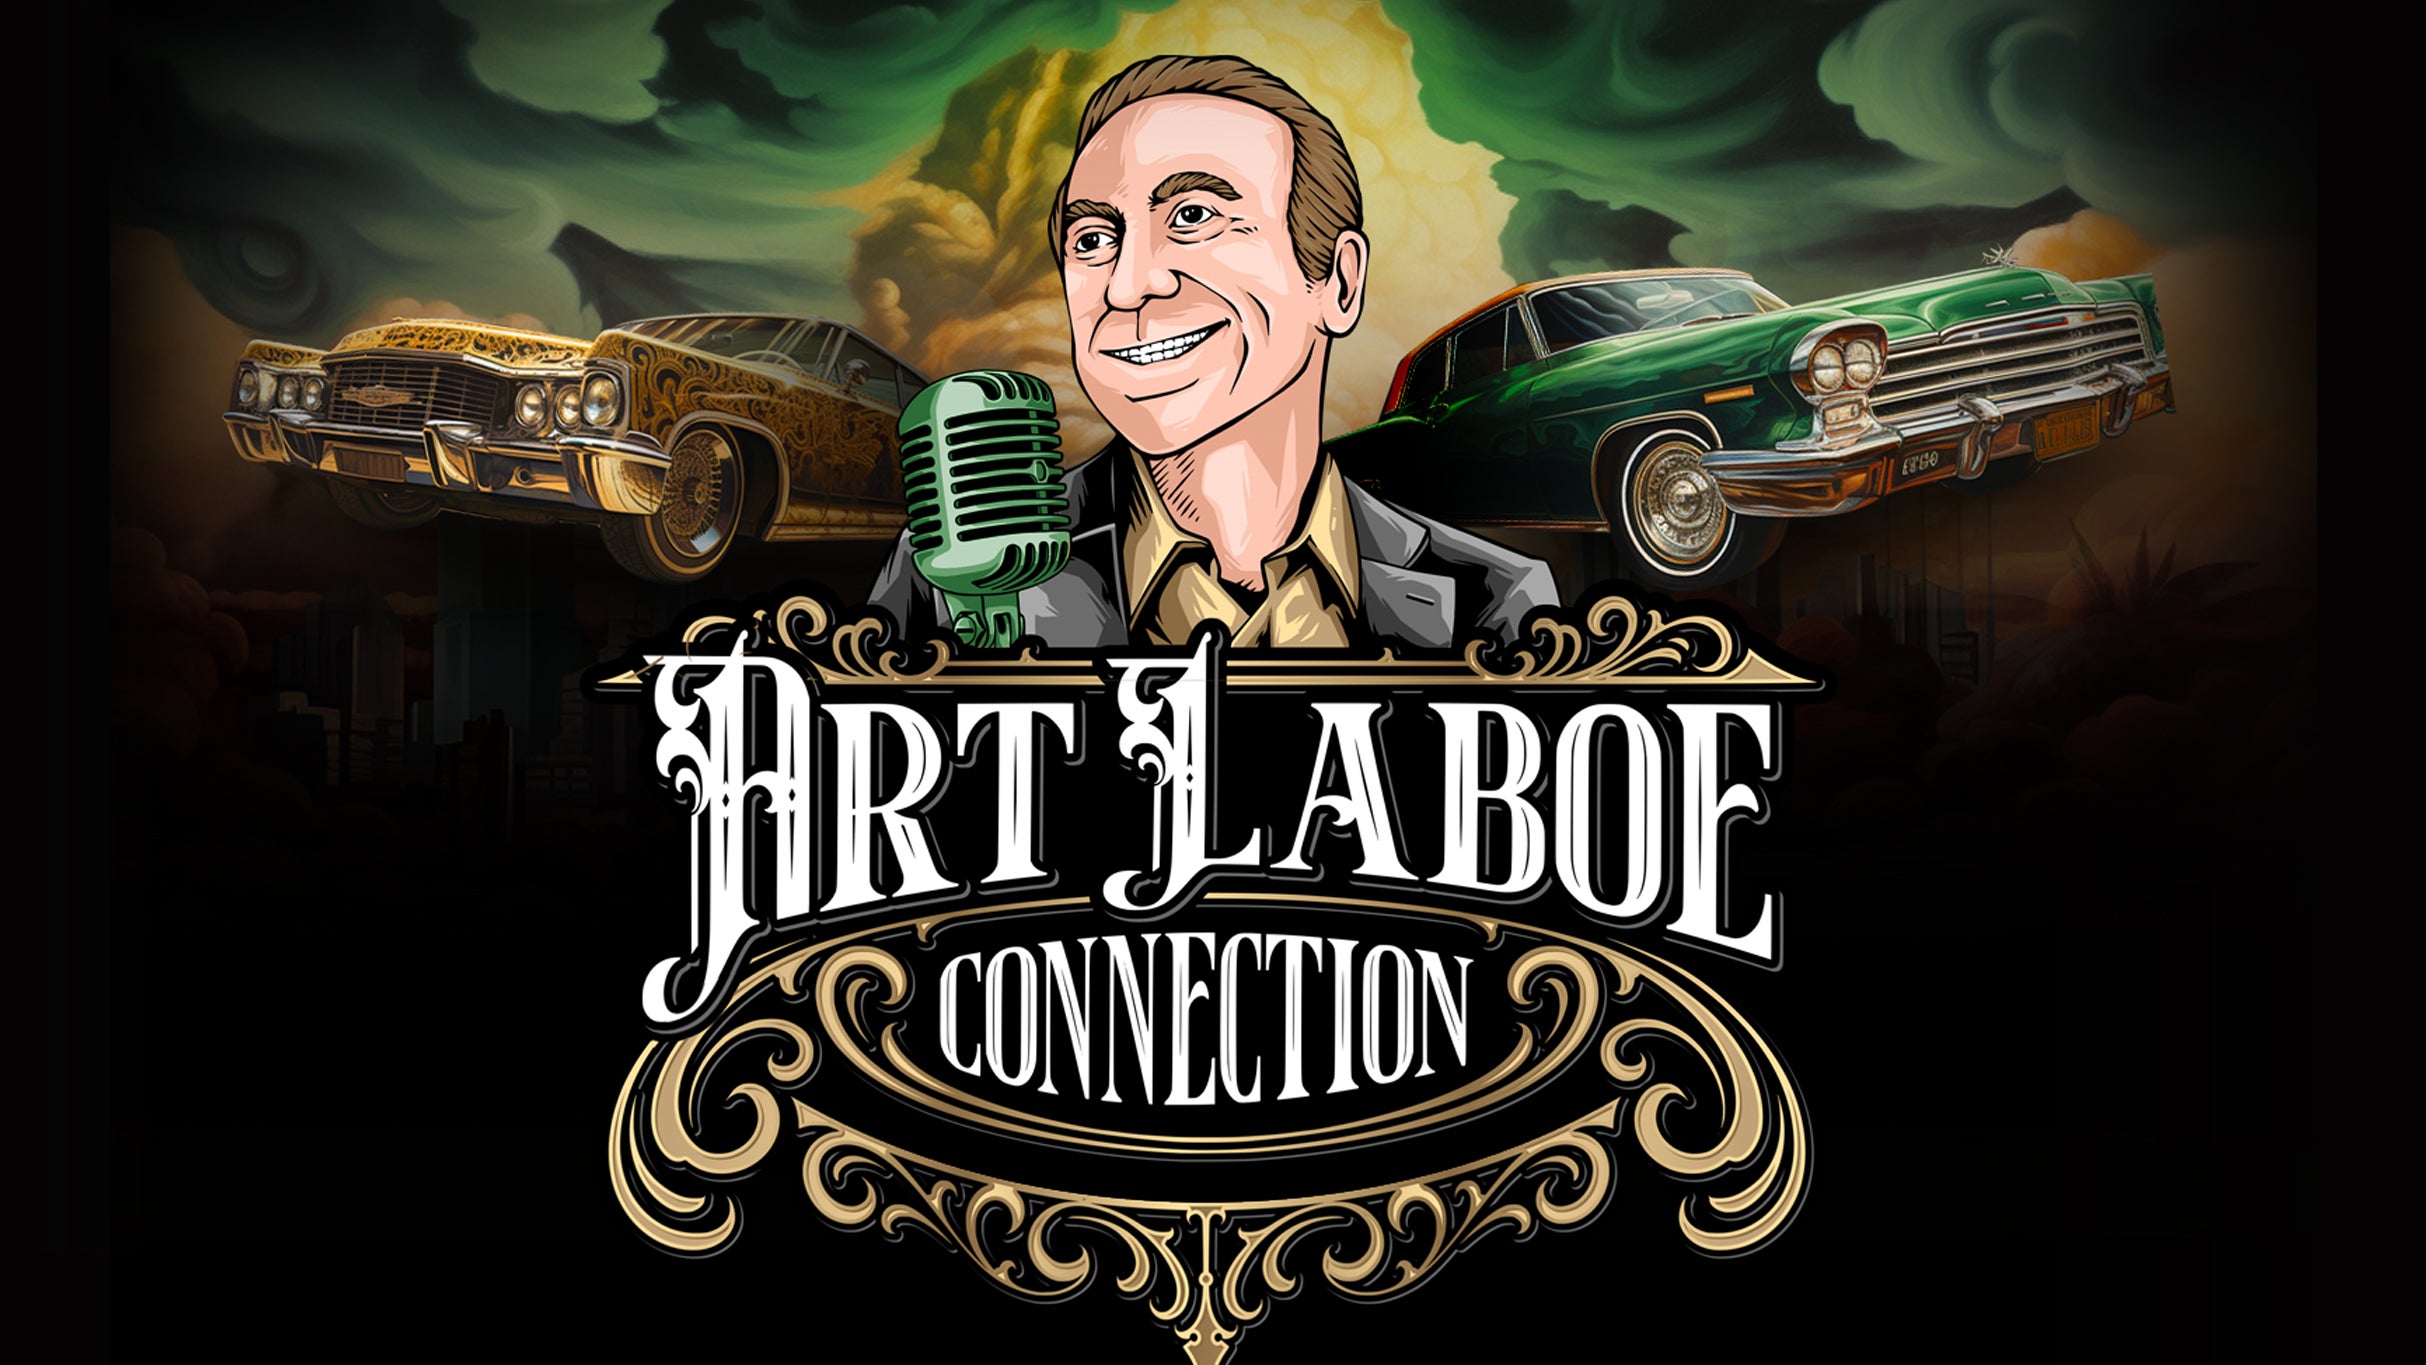 The Art Laboe Connection in San Bernardino promo photo for $35 All In Ticket presale offer code